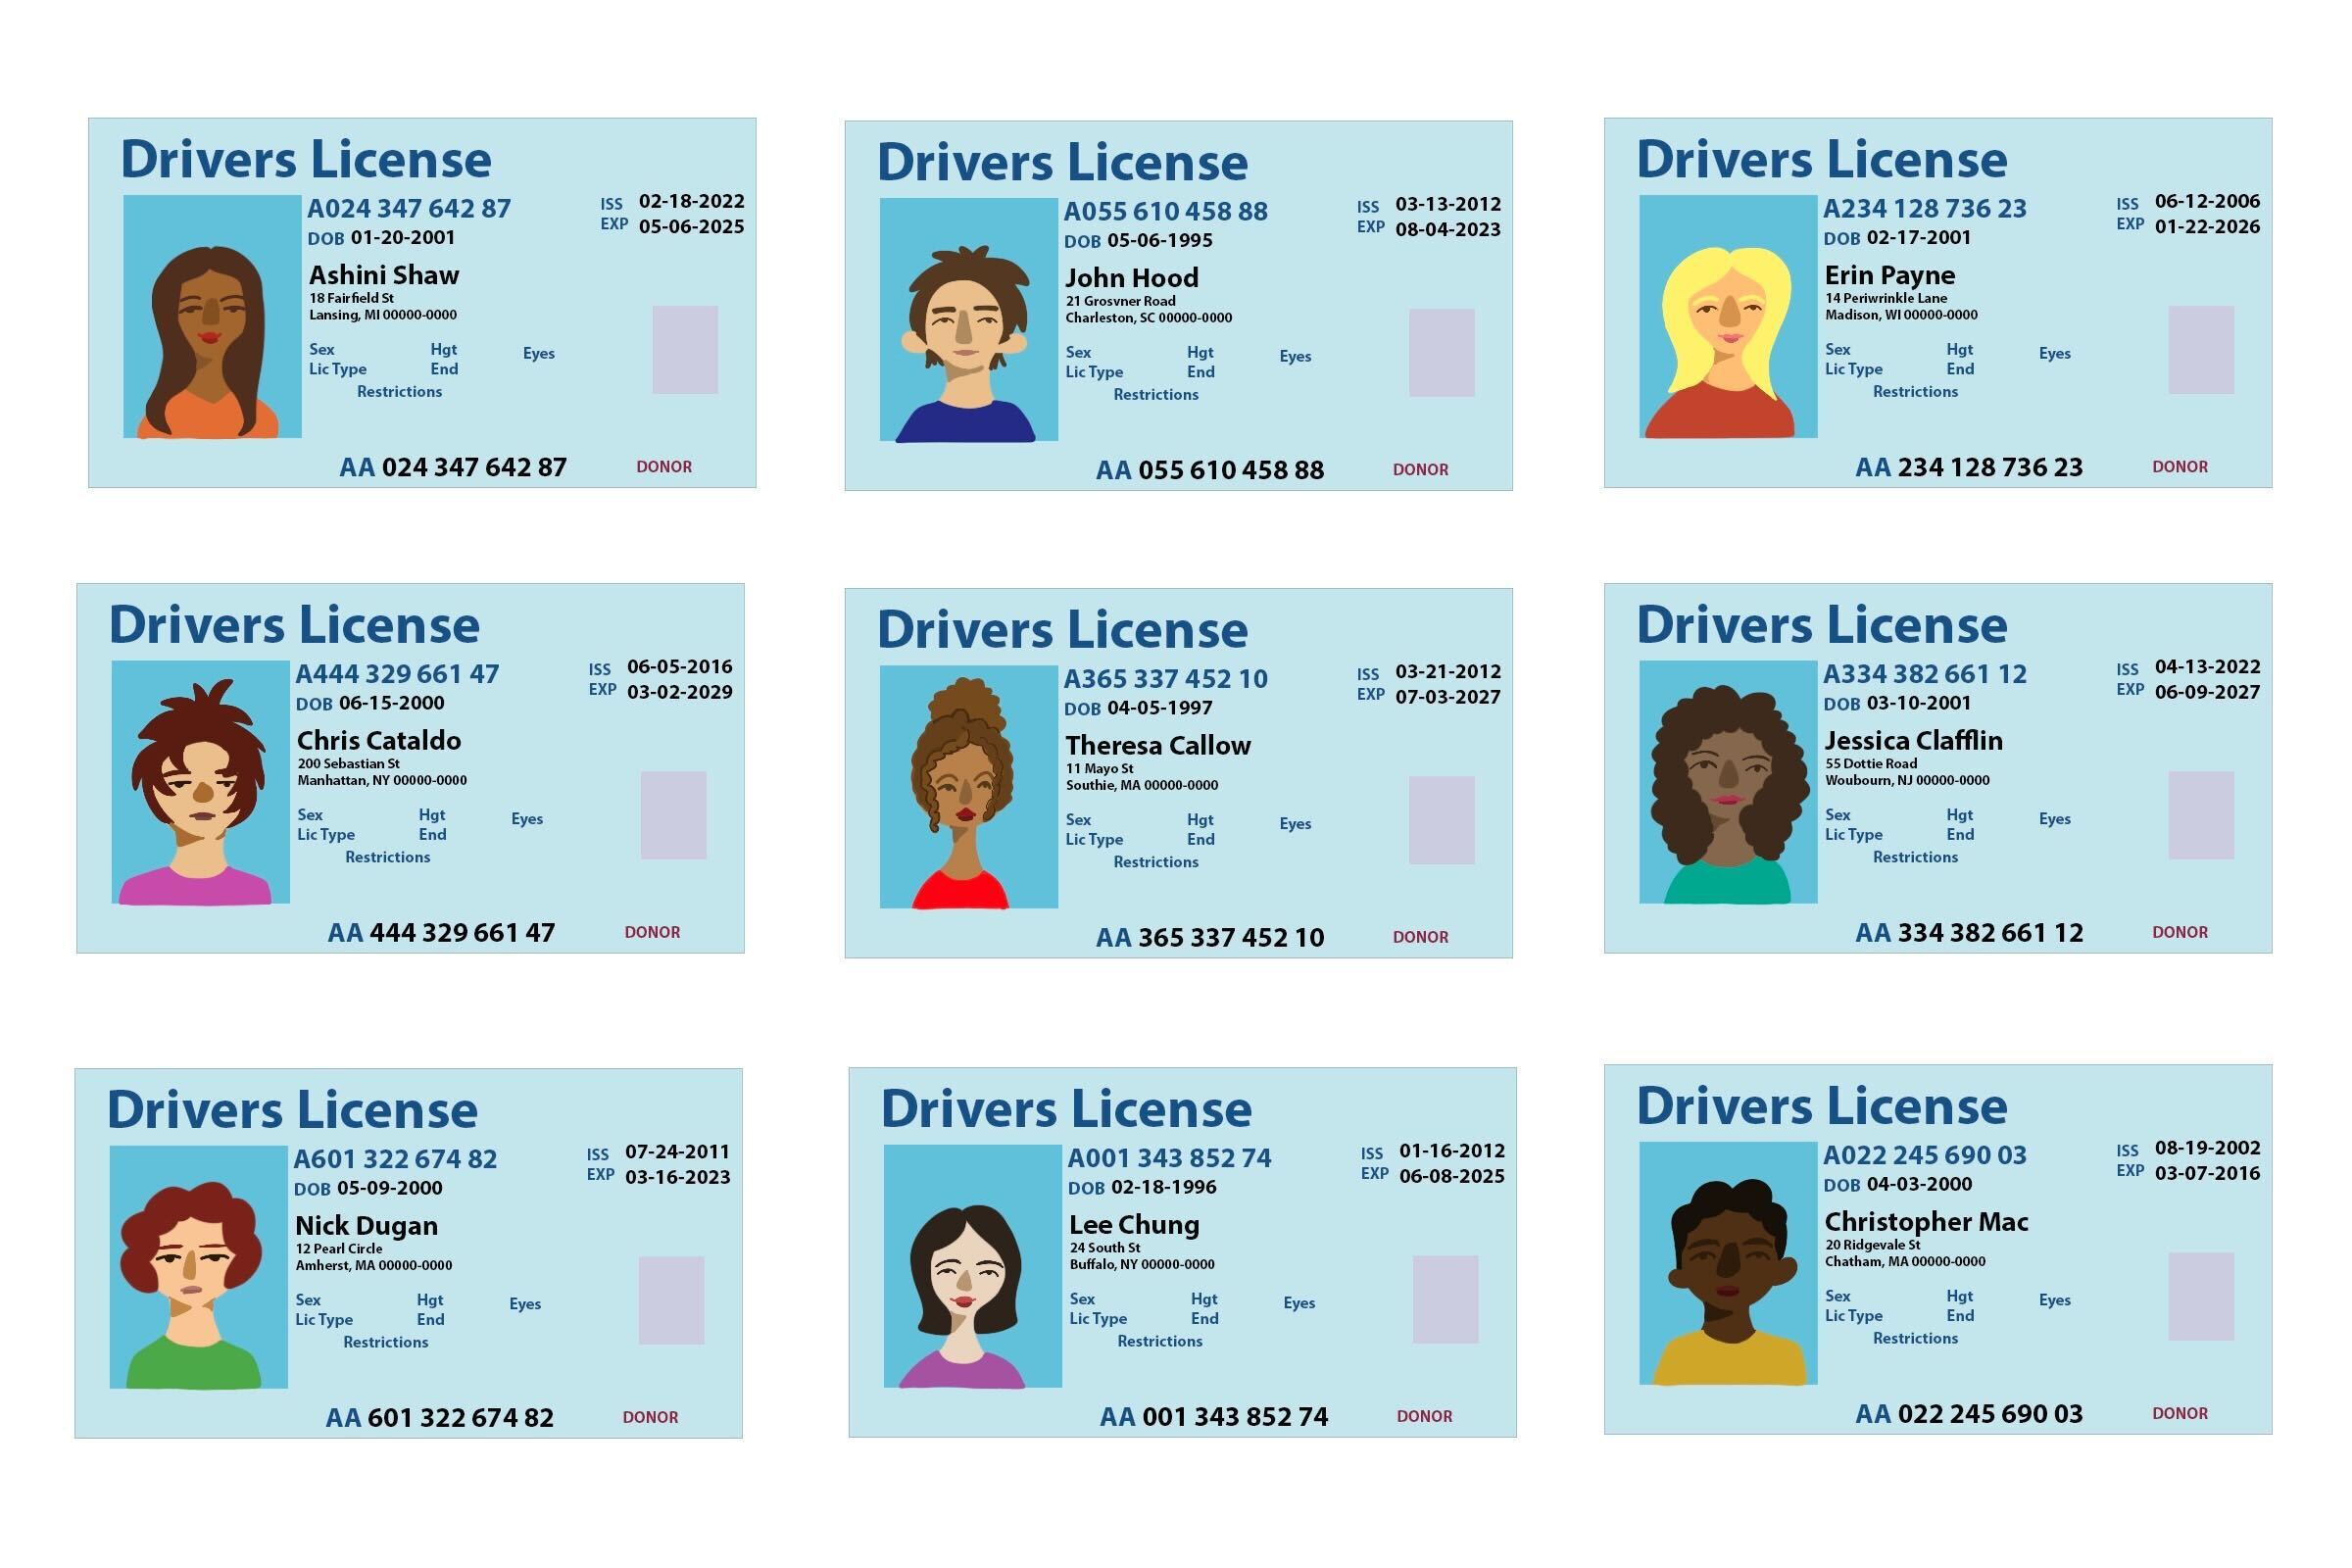 Illinois Fake Id Charges